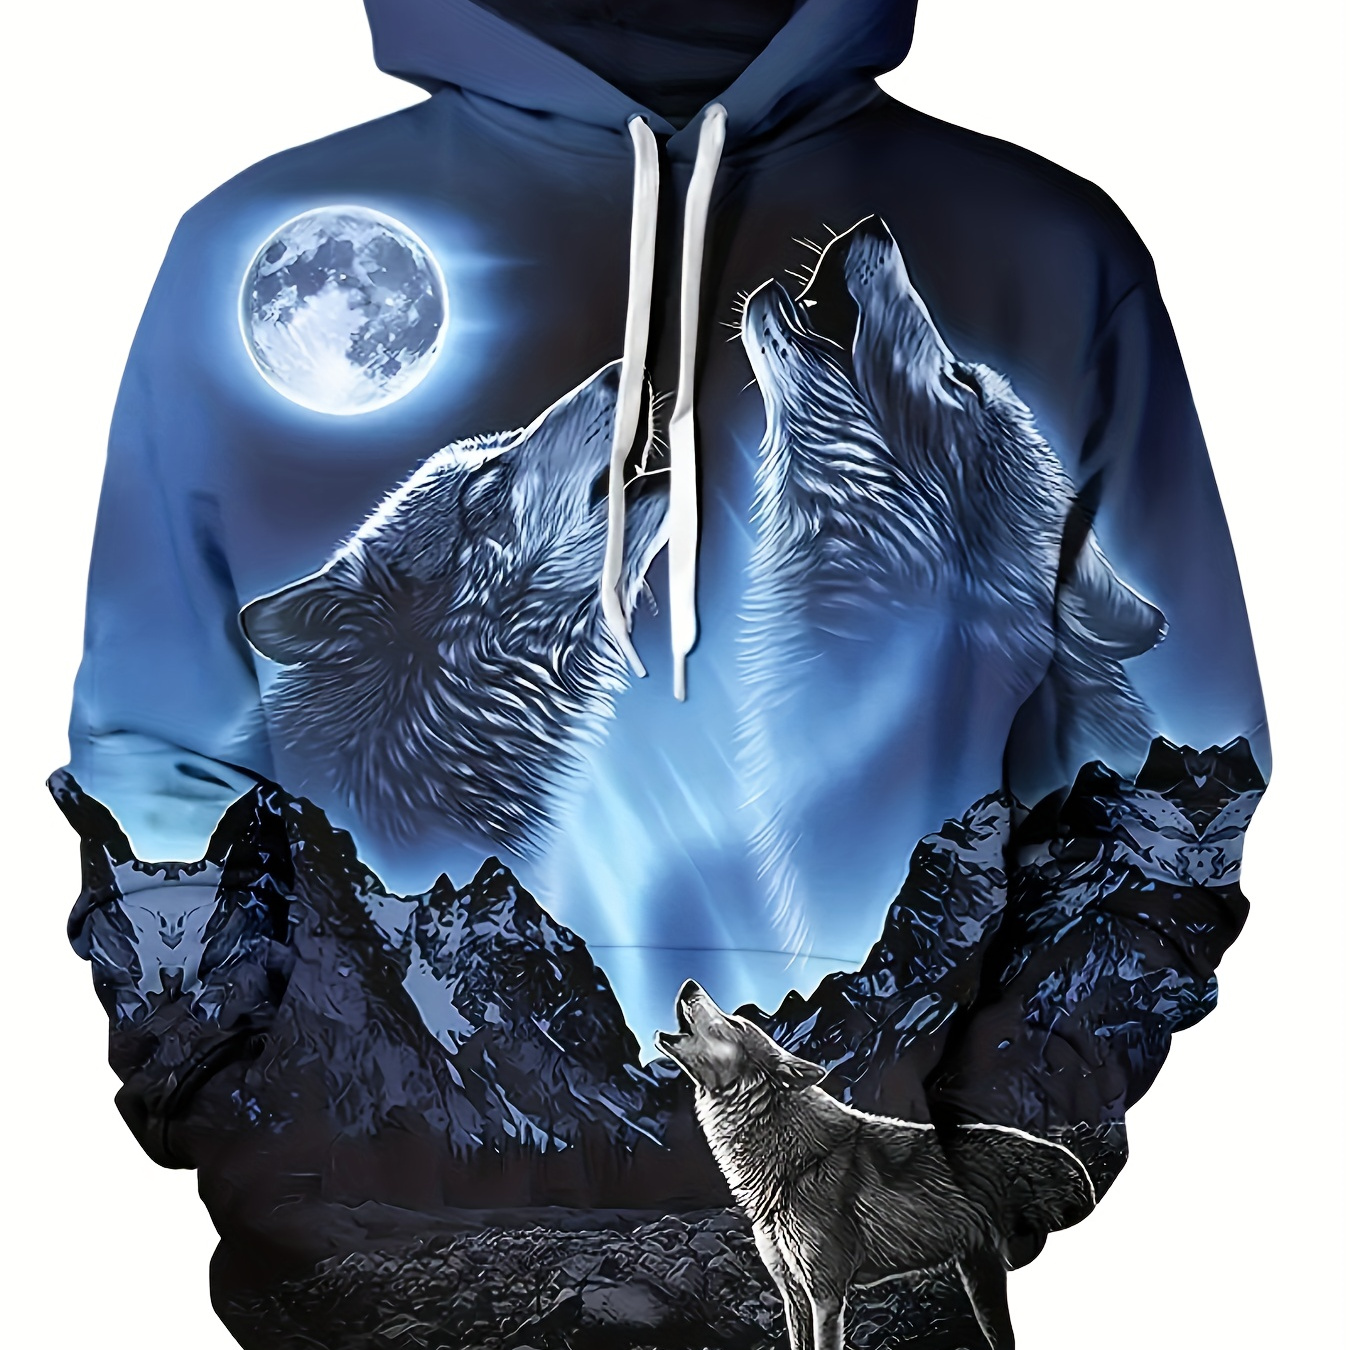 

Wolf Moon Print Men's Pullover Round Neck Hoodies With Kangaroo Pocket & Drawstring Long Sleeve Hooded Sweatshirt Loose Casual Top For Autumn Winter Men's Clothing As Gifts